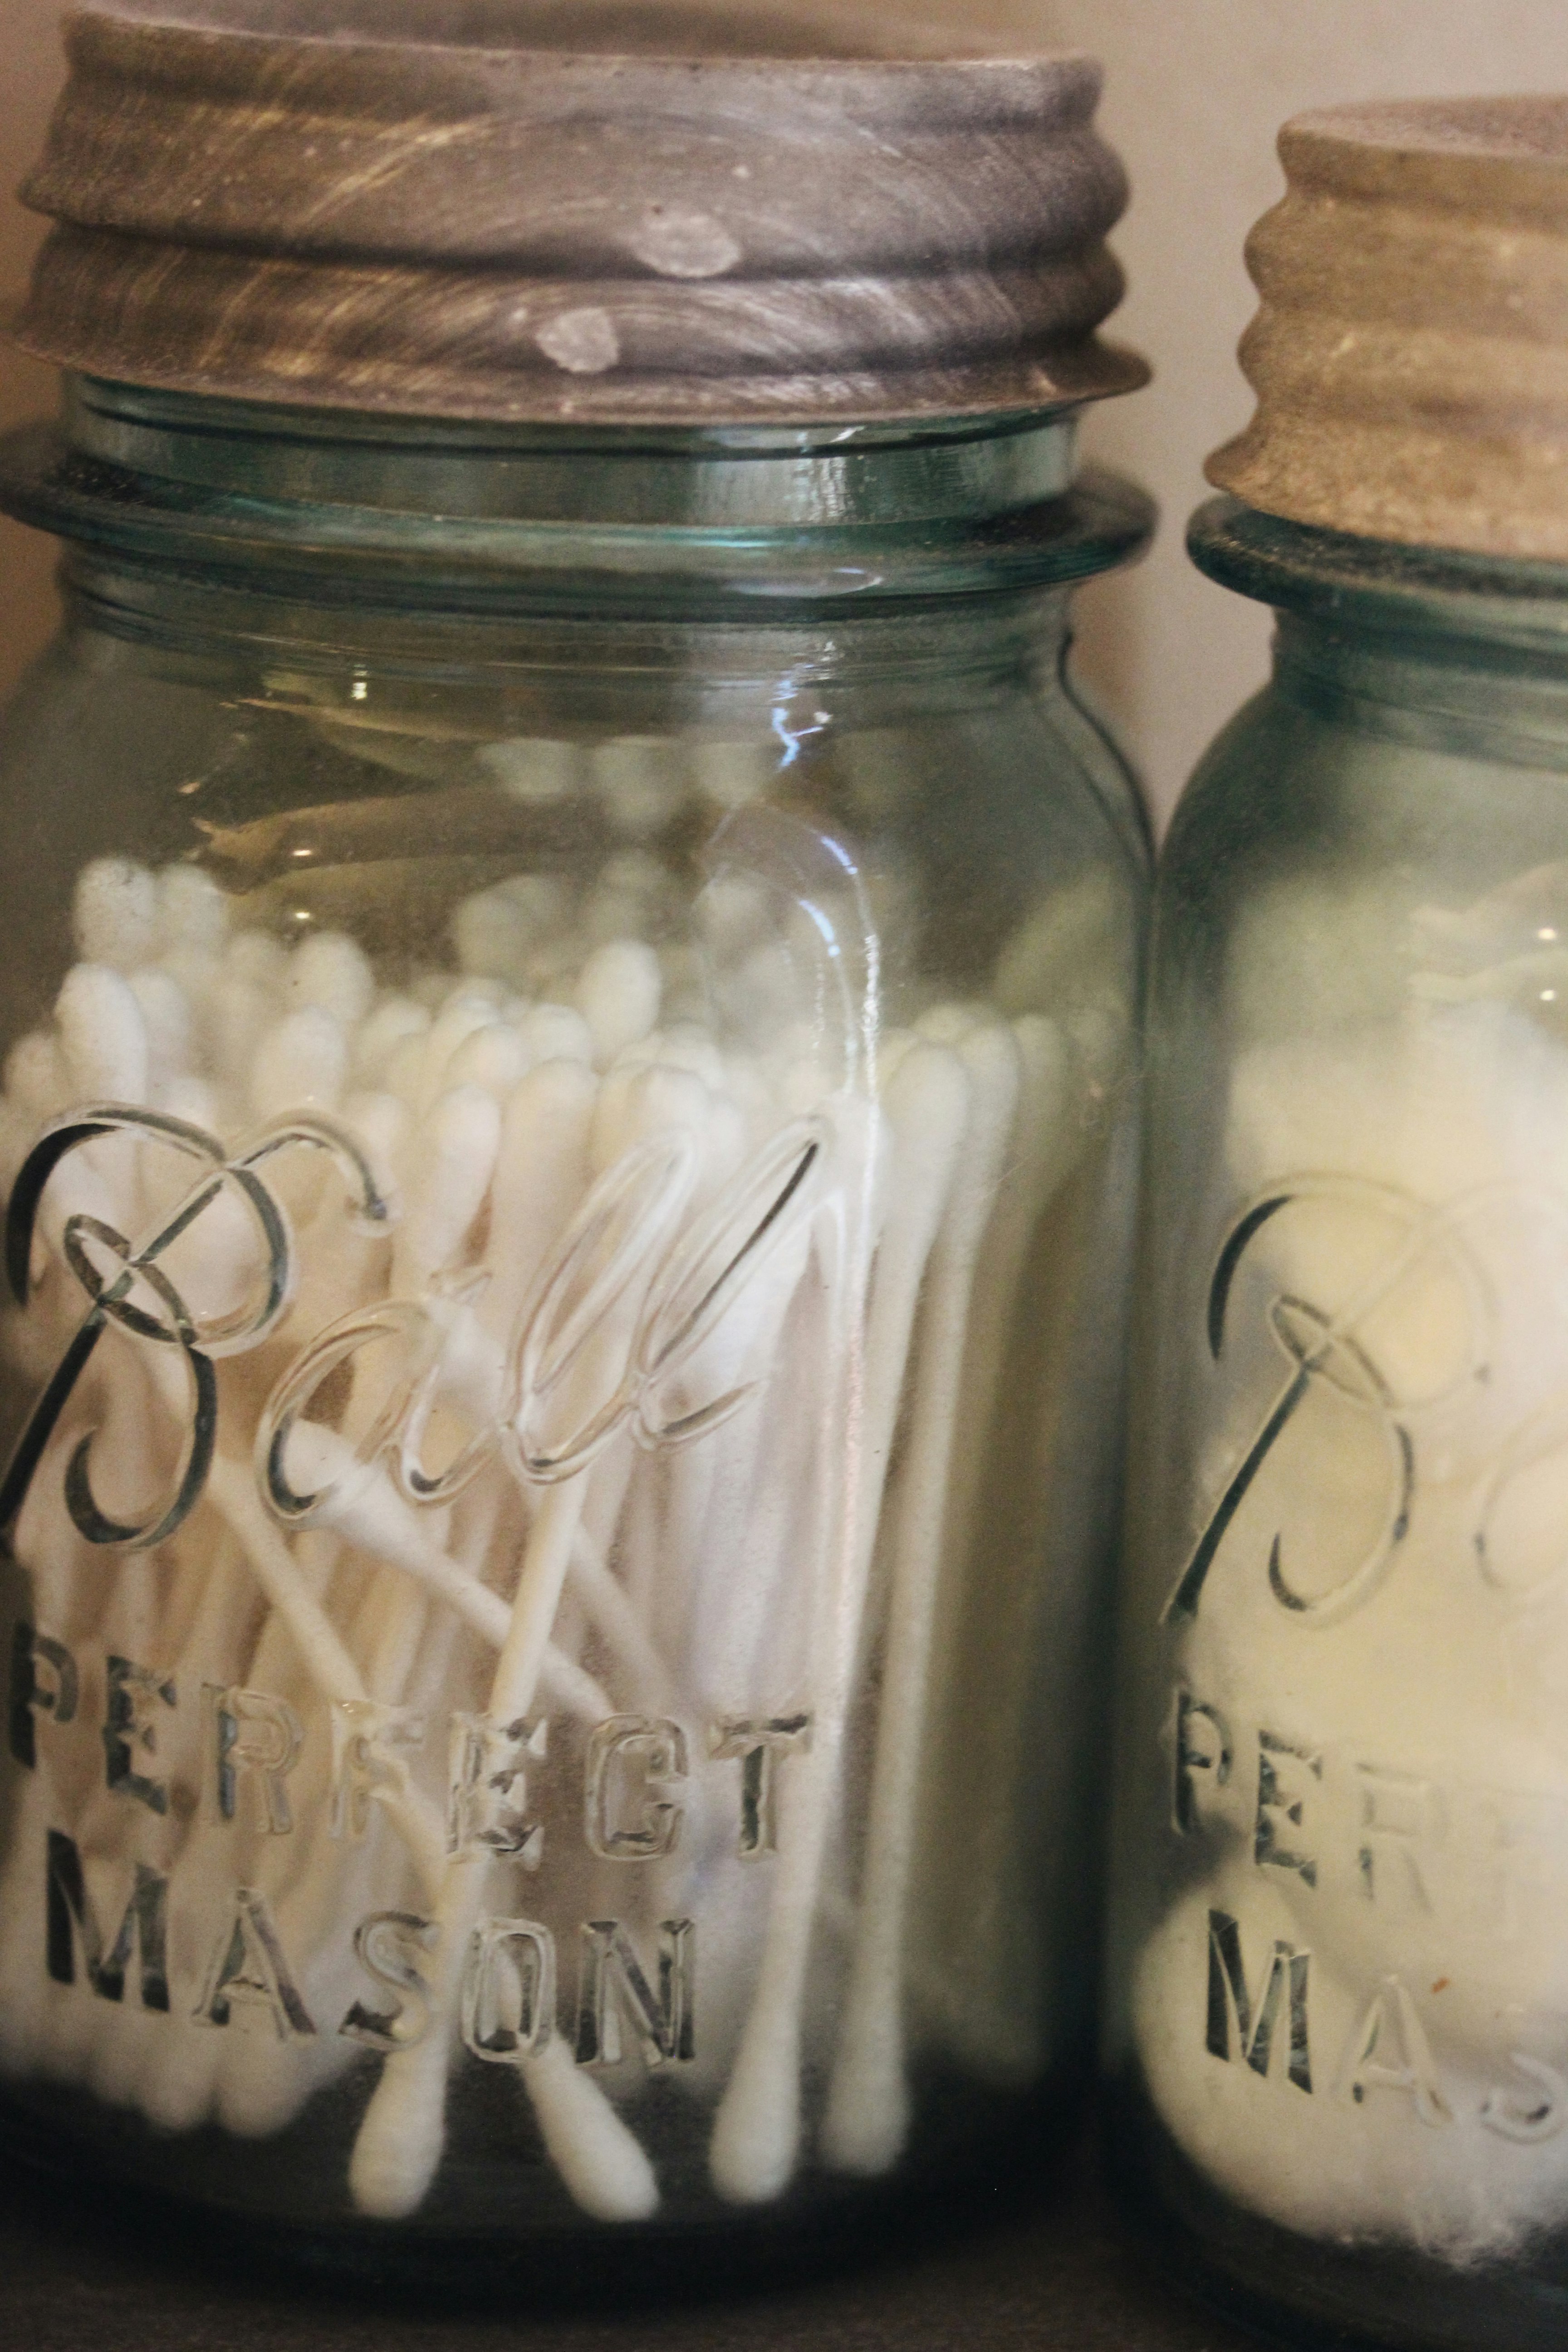 Bathroom essentials like Q-Tips and cotton swabs are stored in decorative vintage blue Ball glass canning jars, with logo and text writing imprinted on the sides and zinc silver lids on a shelf.